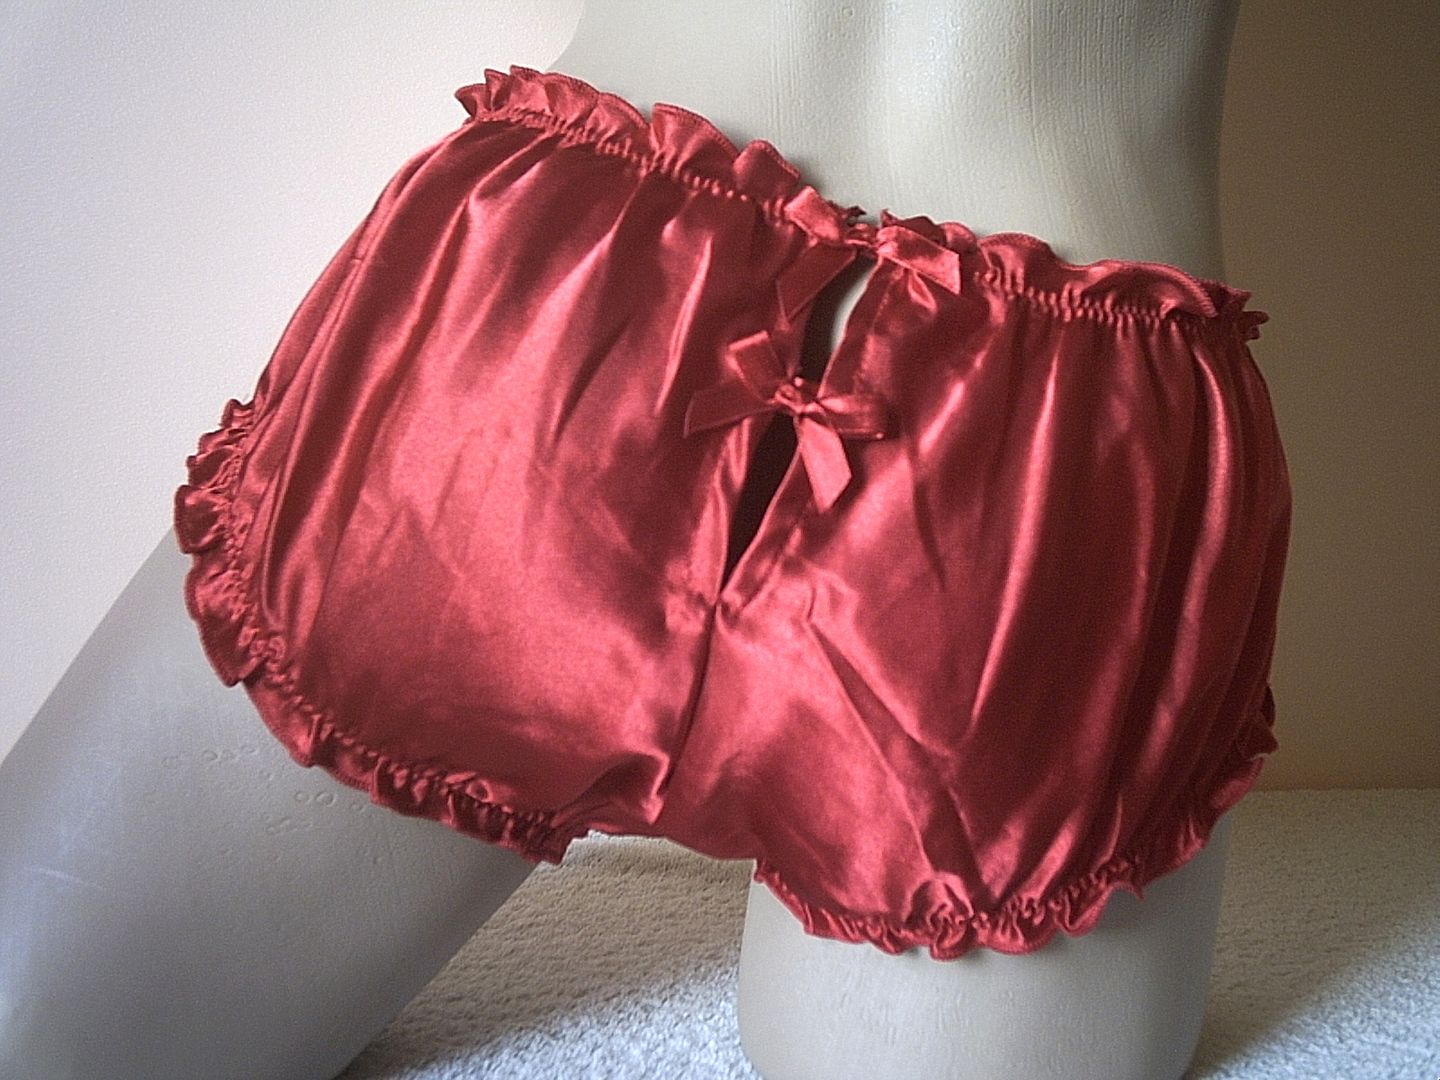 Cute Cherry Red Silky Satin Shorty Brief Panties Frilly Knickers Uk M L 50 Ebay